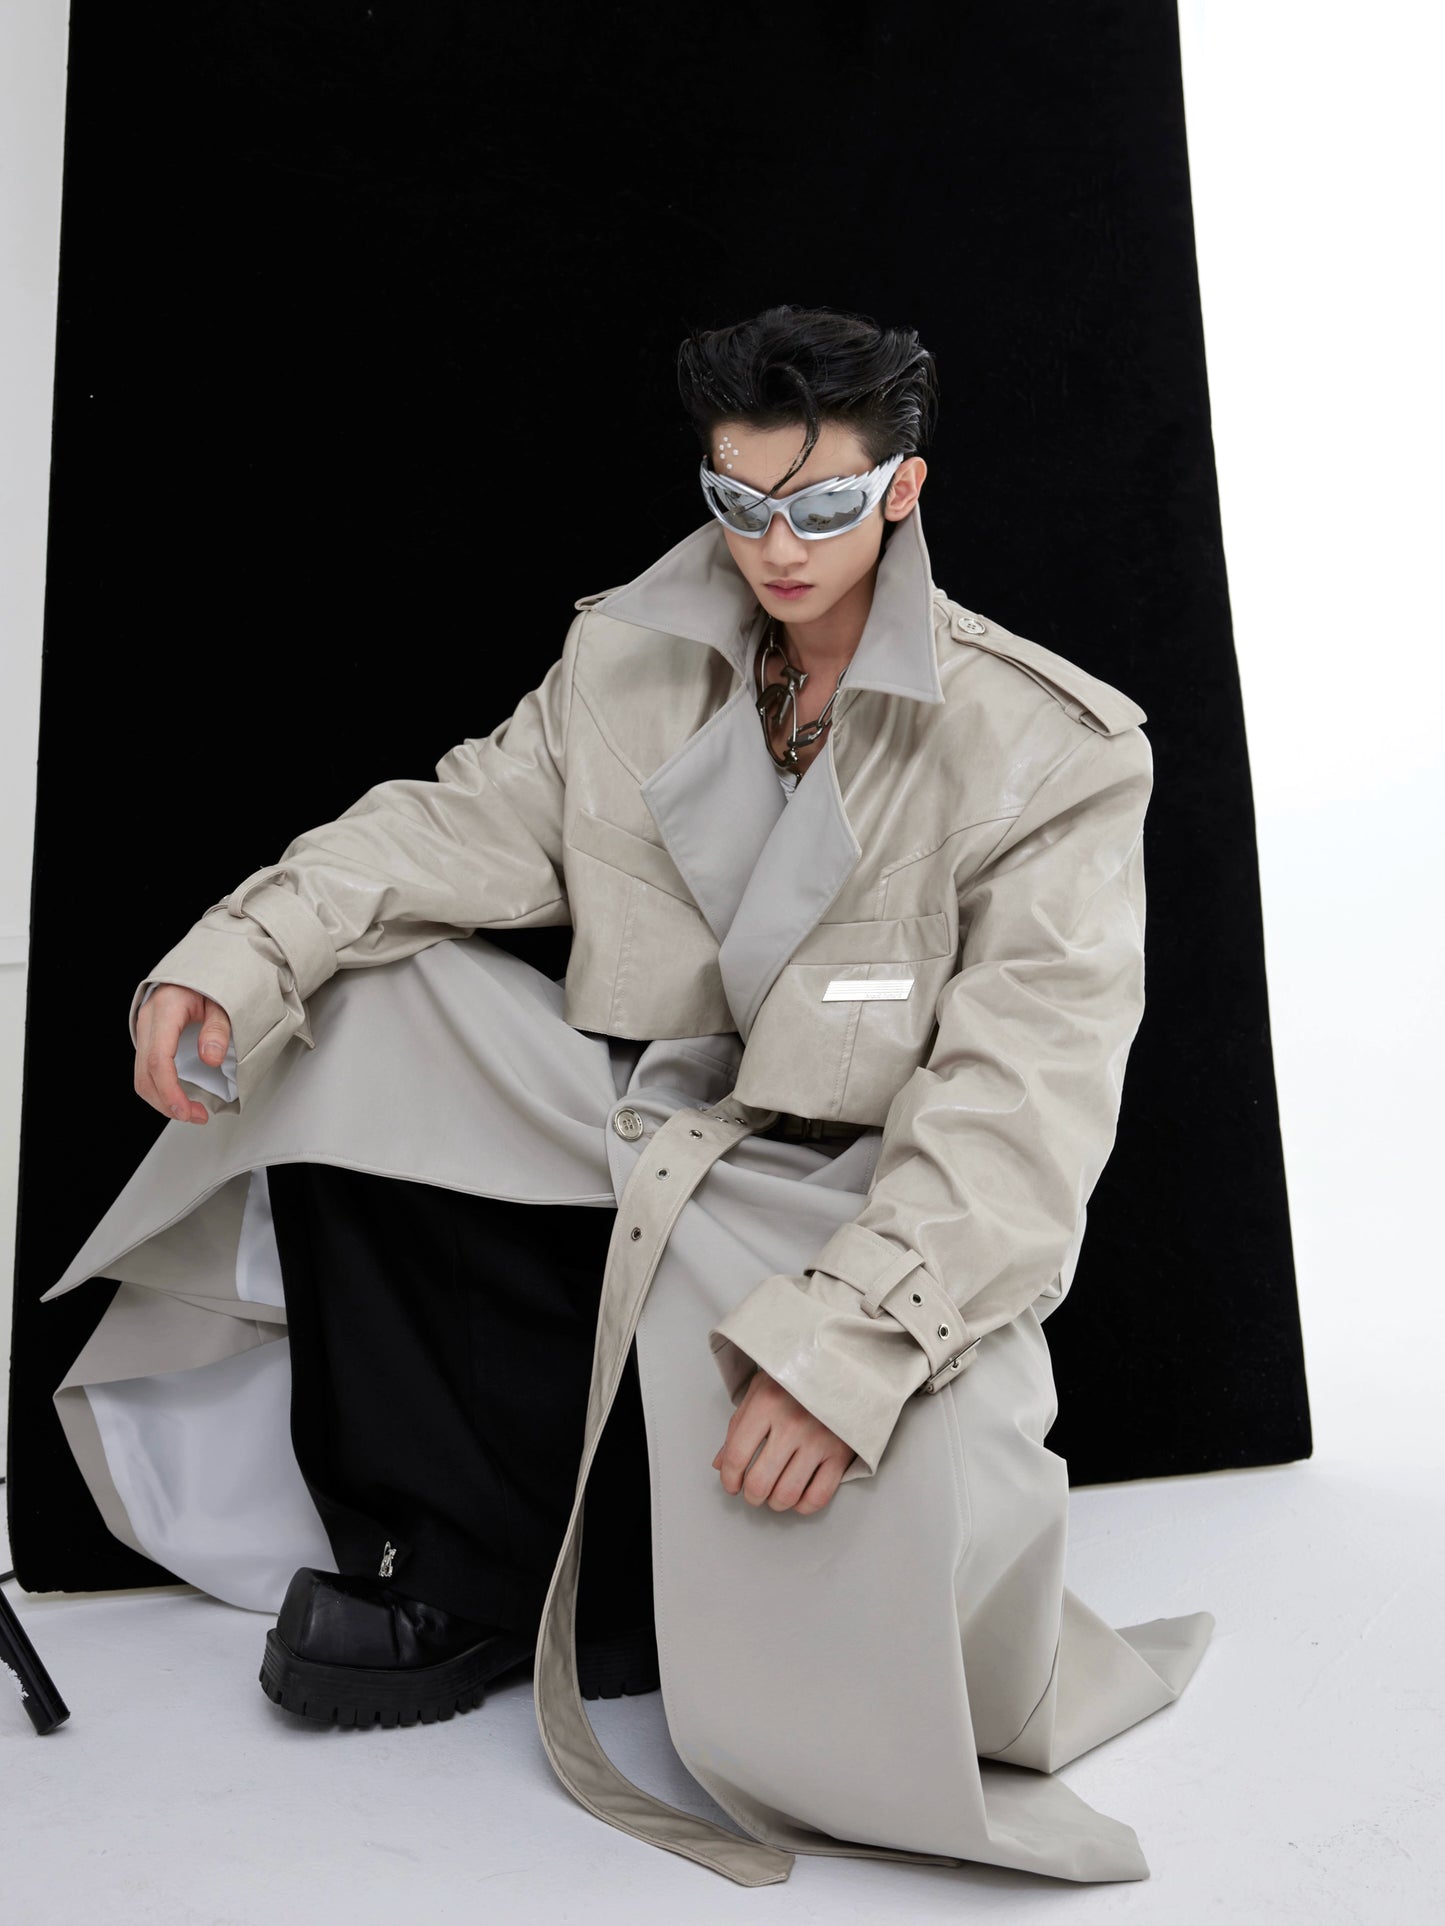 Cultur E24s is a heavyweight, niche deconstructed double-panelled padded-shoulder maxi coat with a breasted trench coat